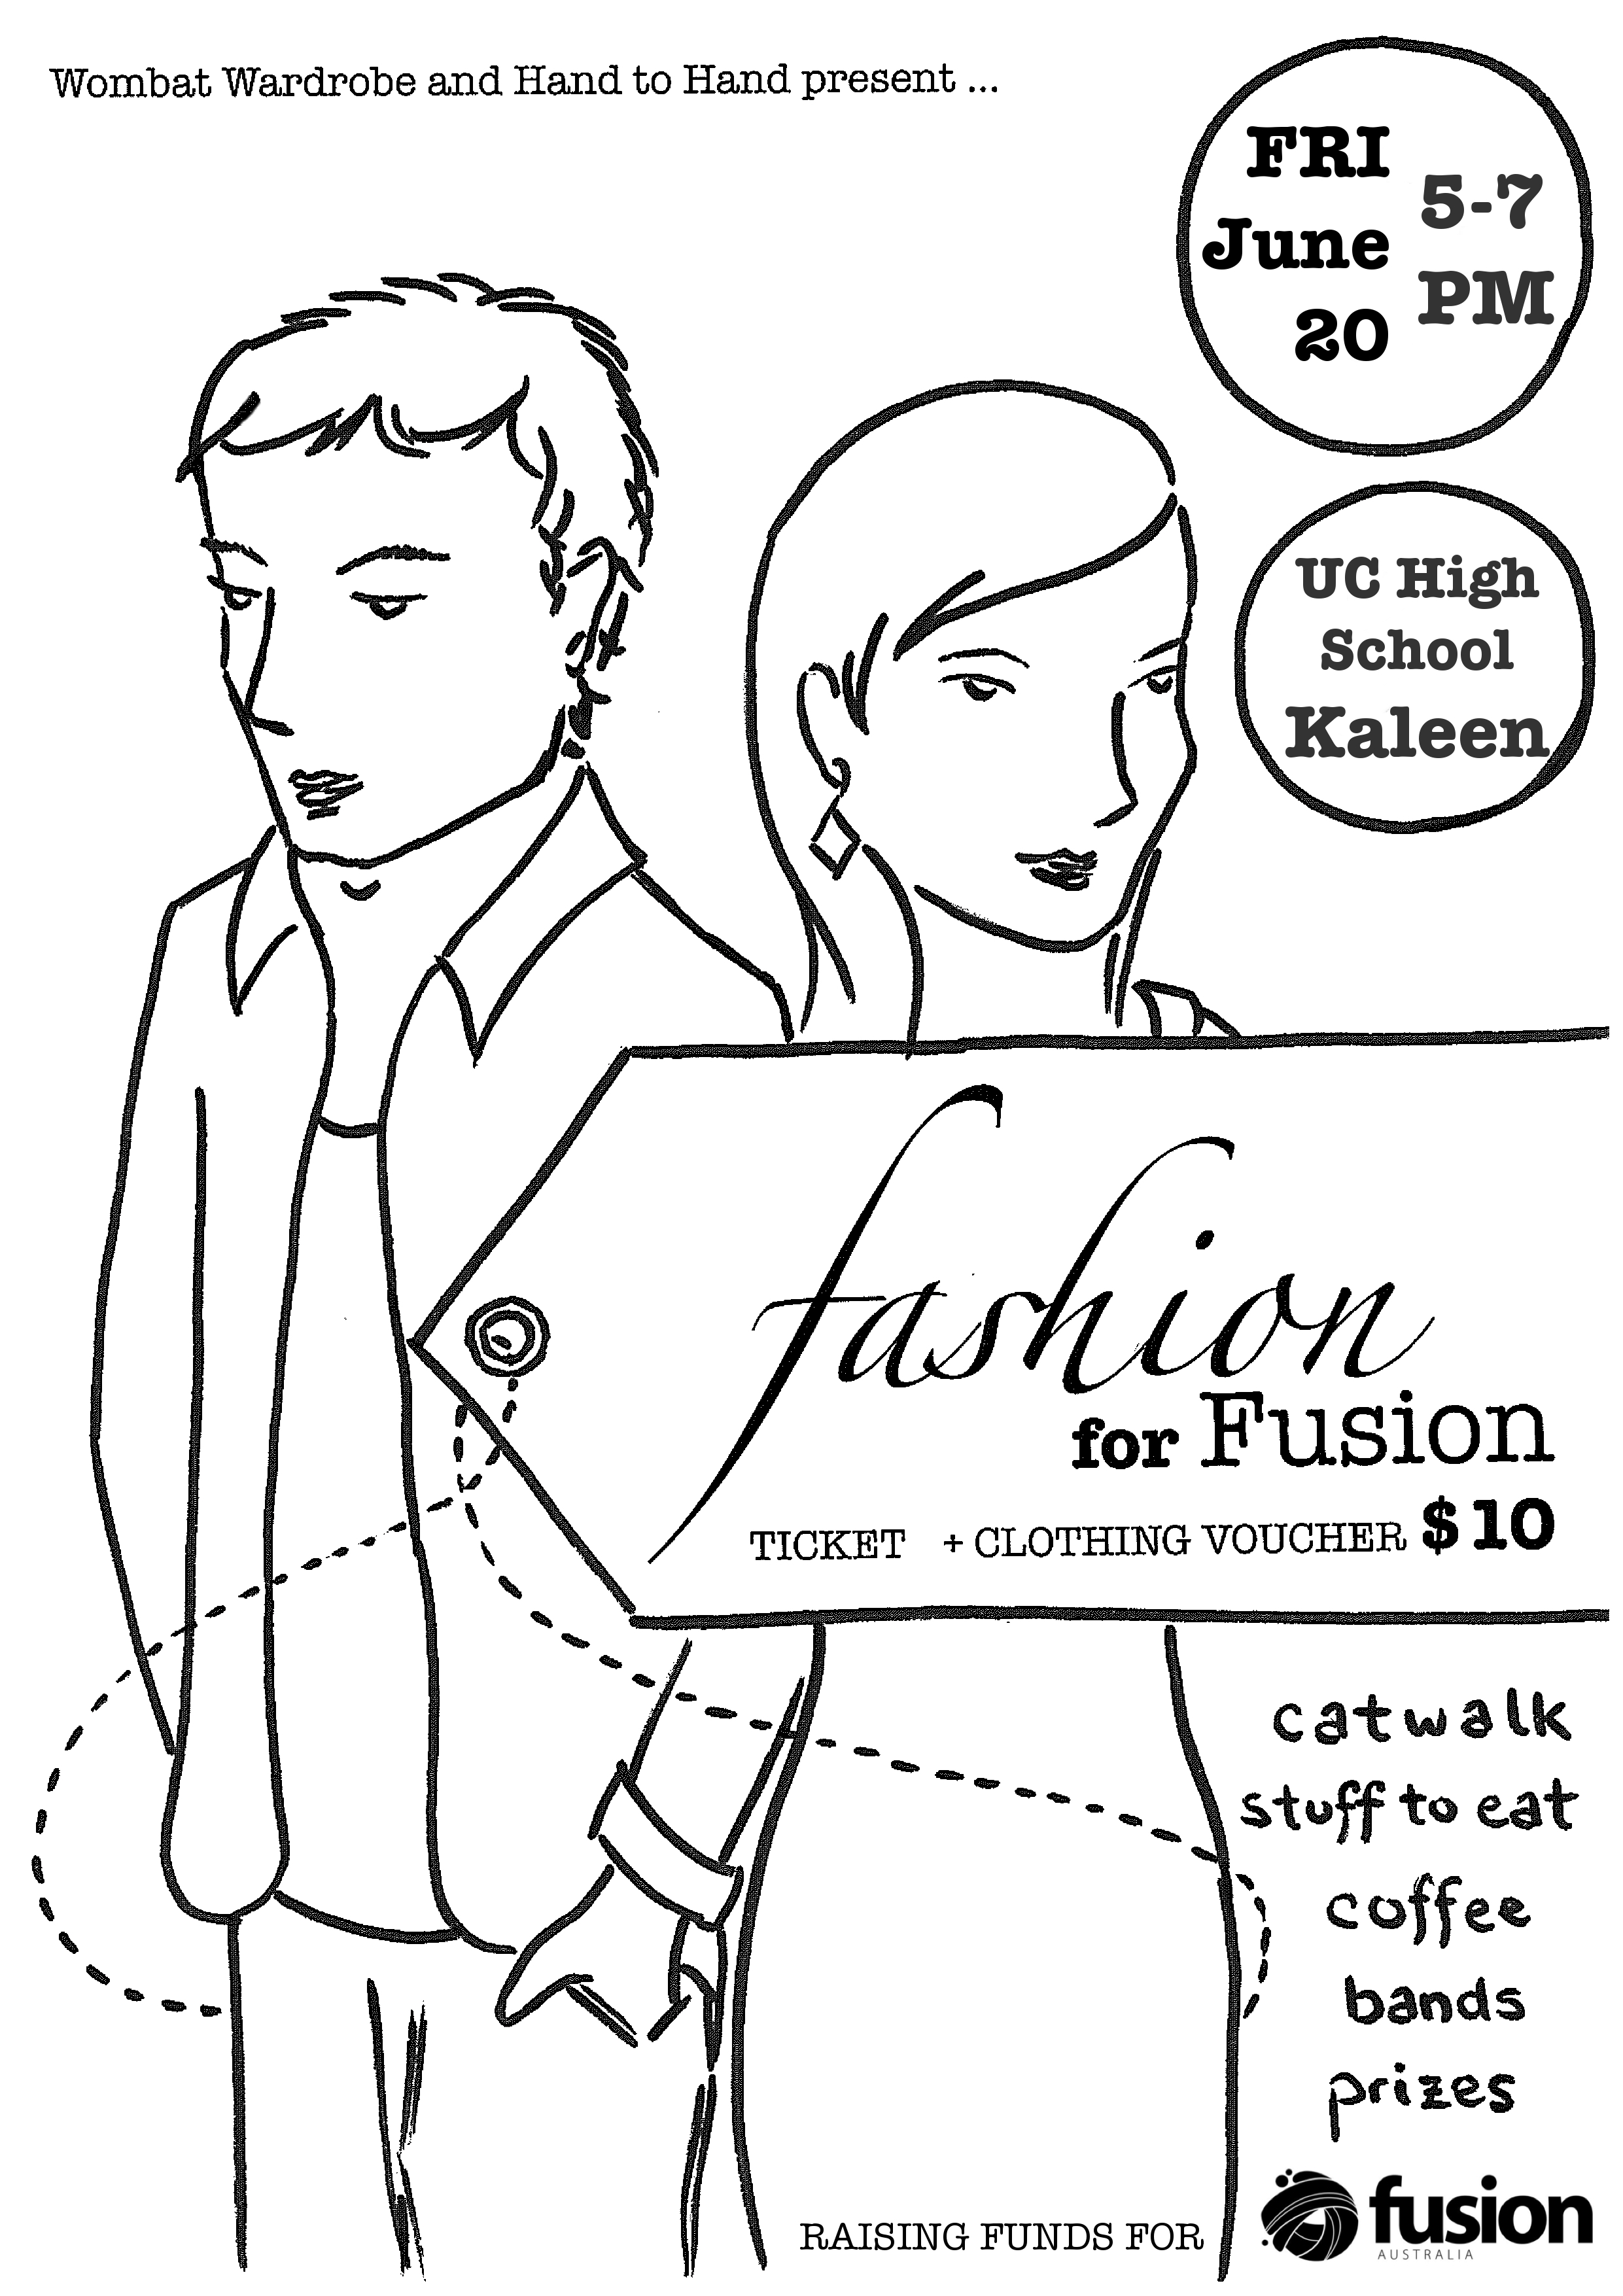 This Friday June 20 is “Fashion for Fusion” our first ever pop-up-op-shop!